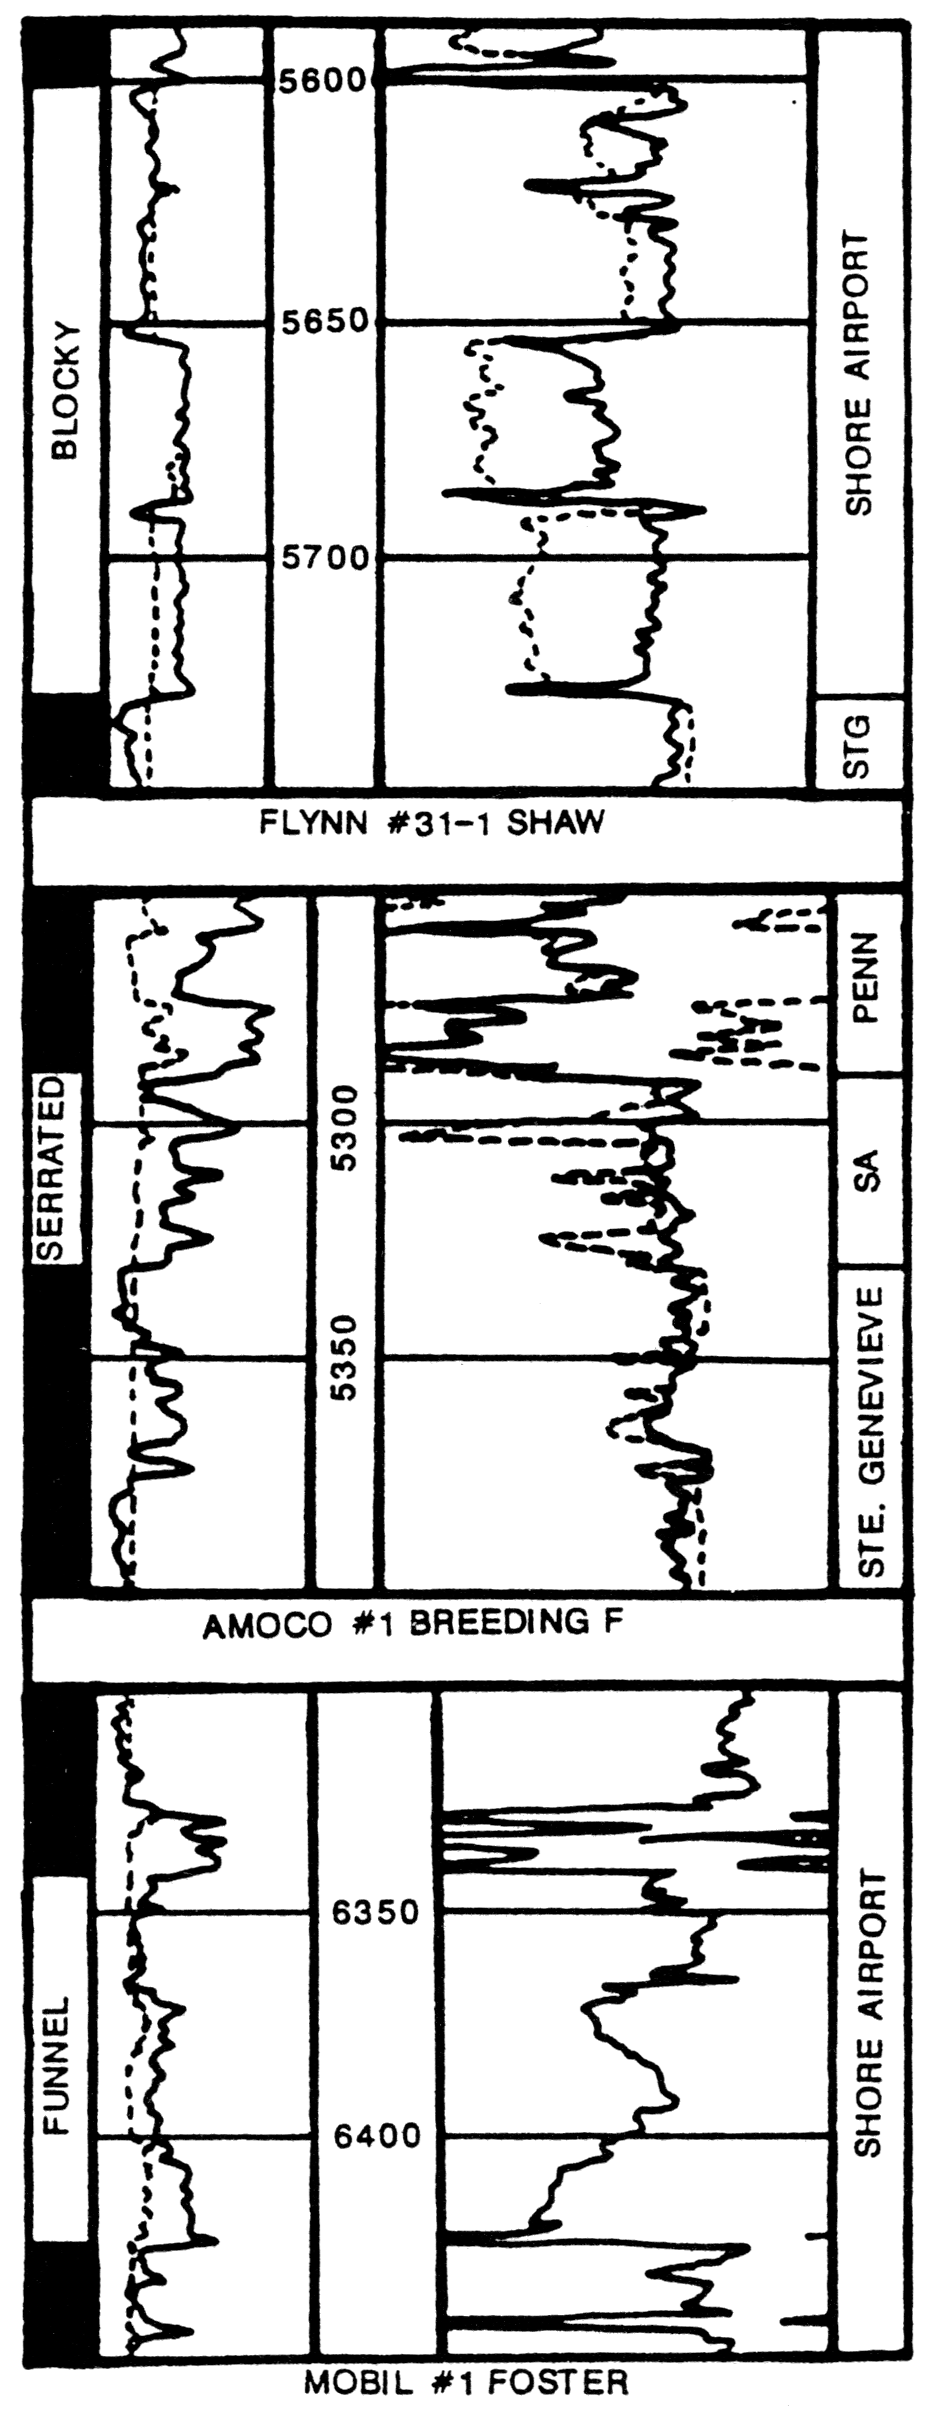 Log profiles observed in the Shore Airport in southwestern Kansas.